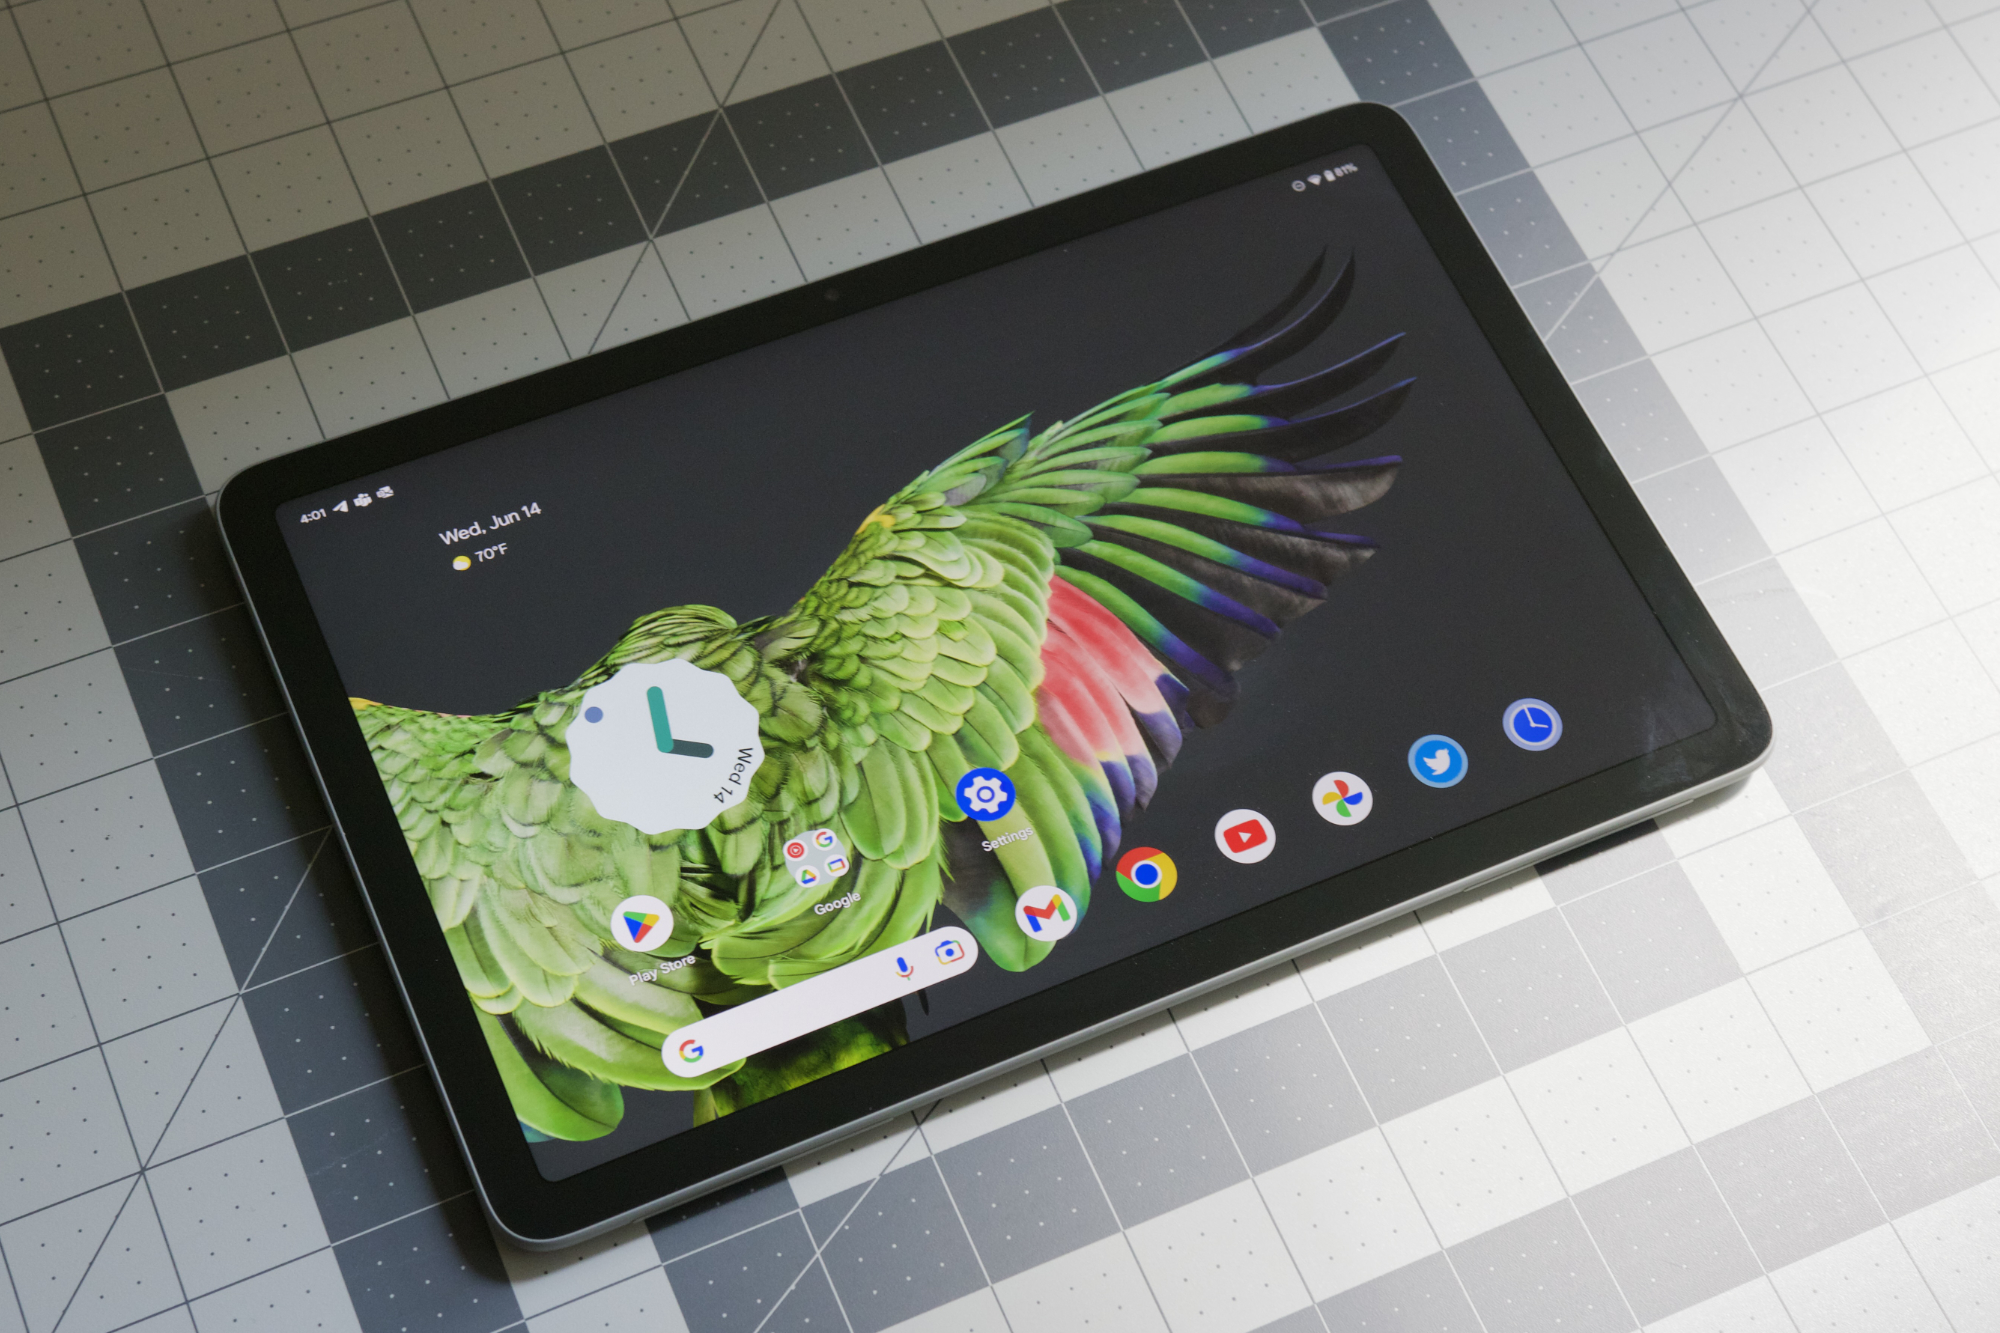 Google Pixel Tablet Review: Bringing Android to the big screen